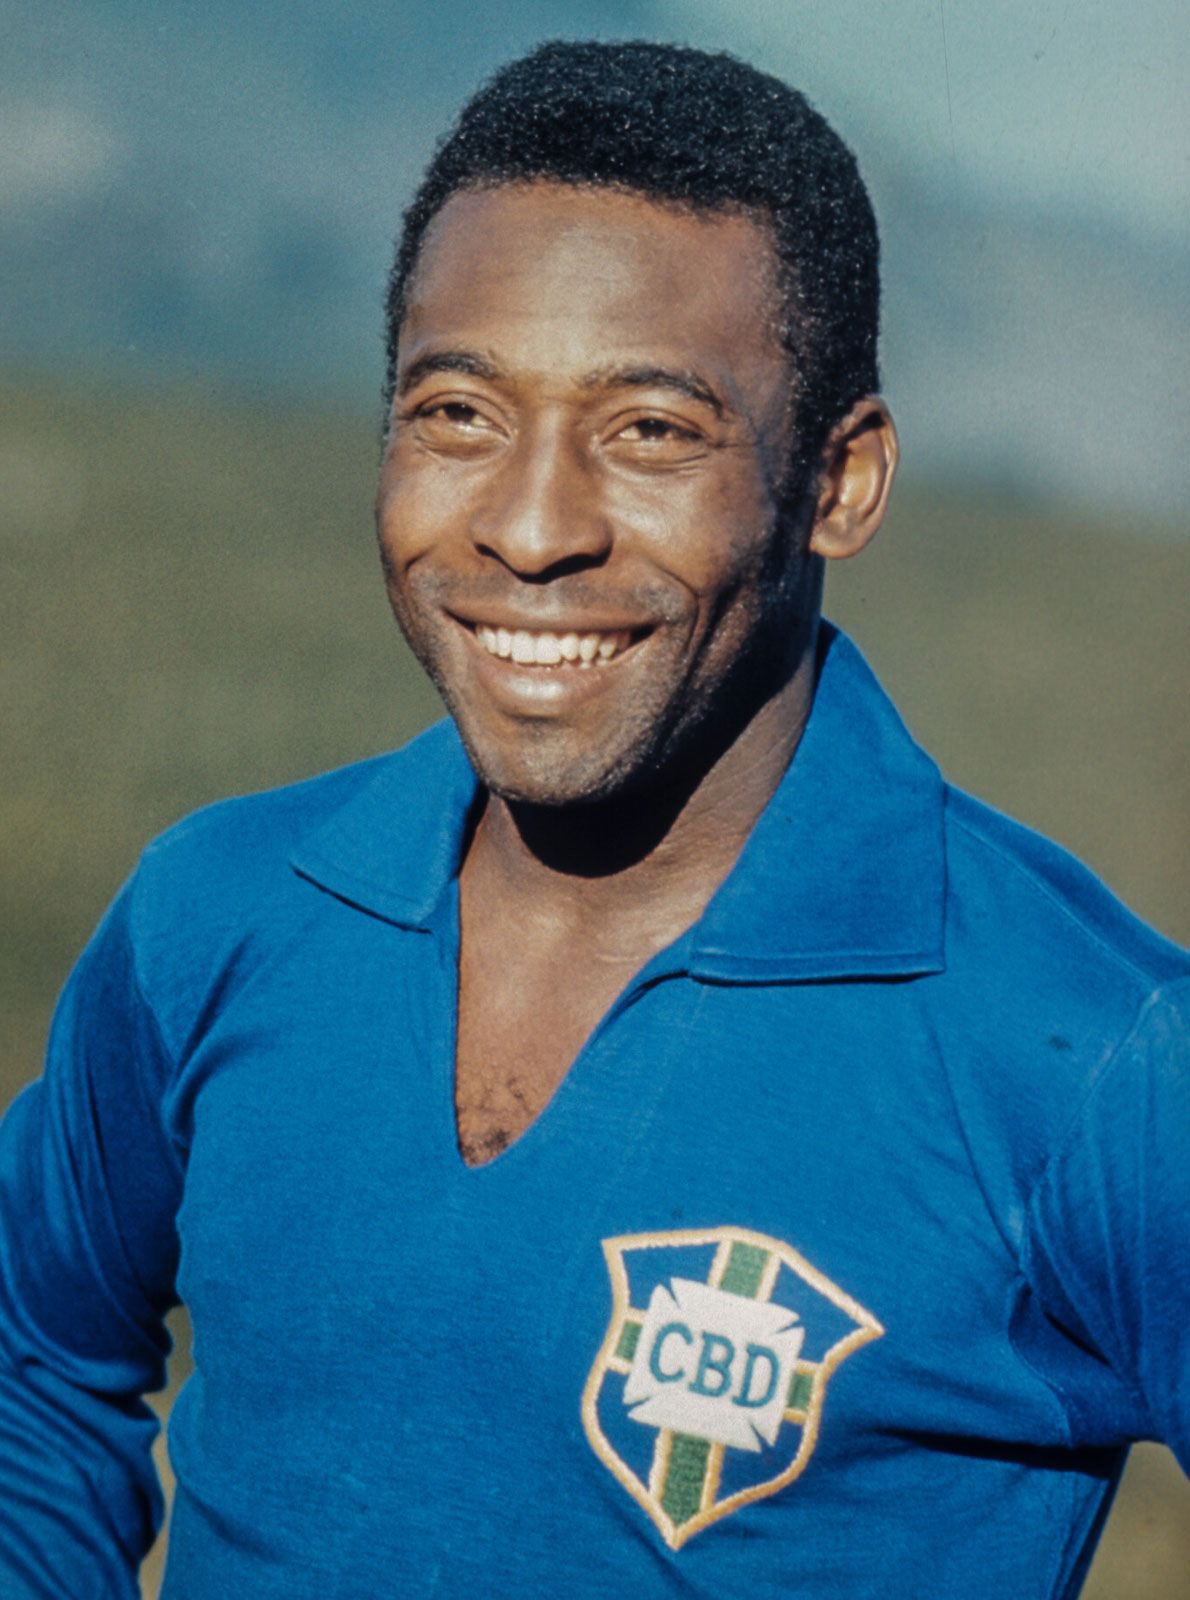 Brazilian legend Pele, one of the greatest footballers, has died at the age of 82